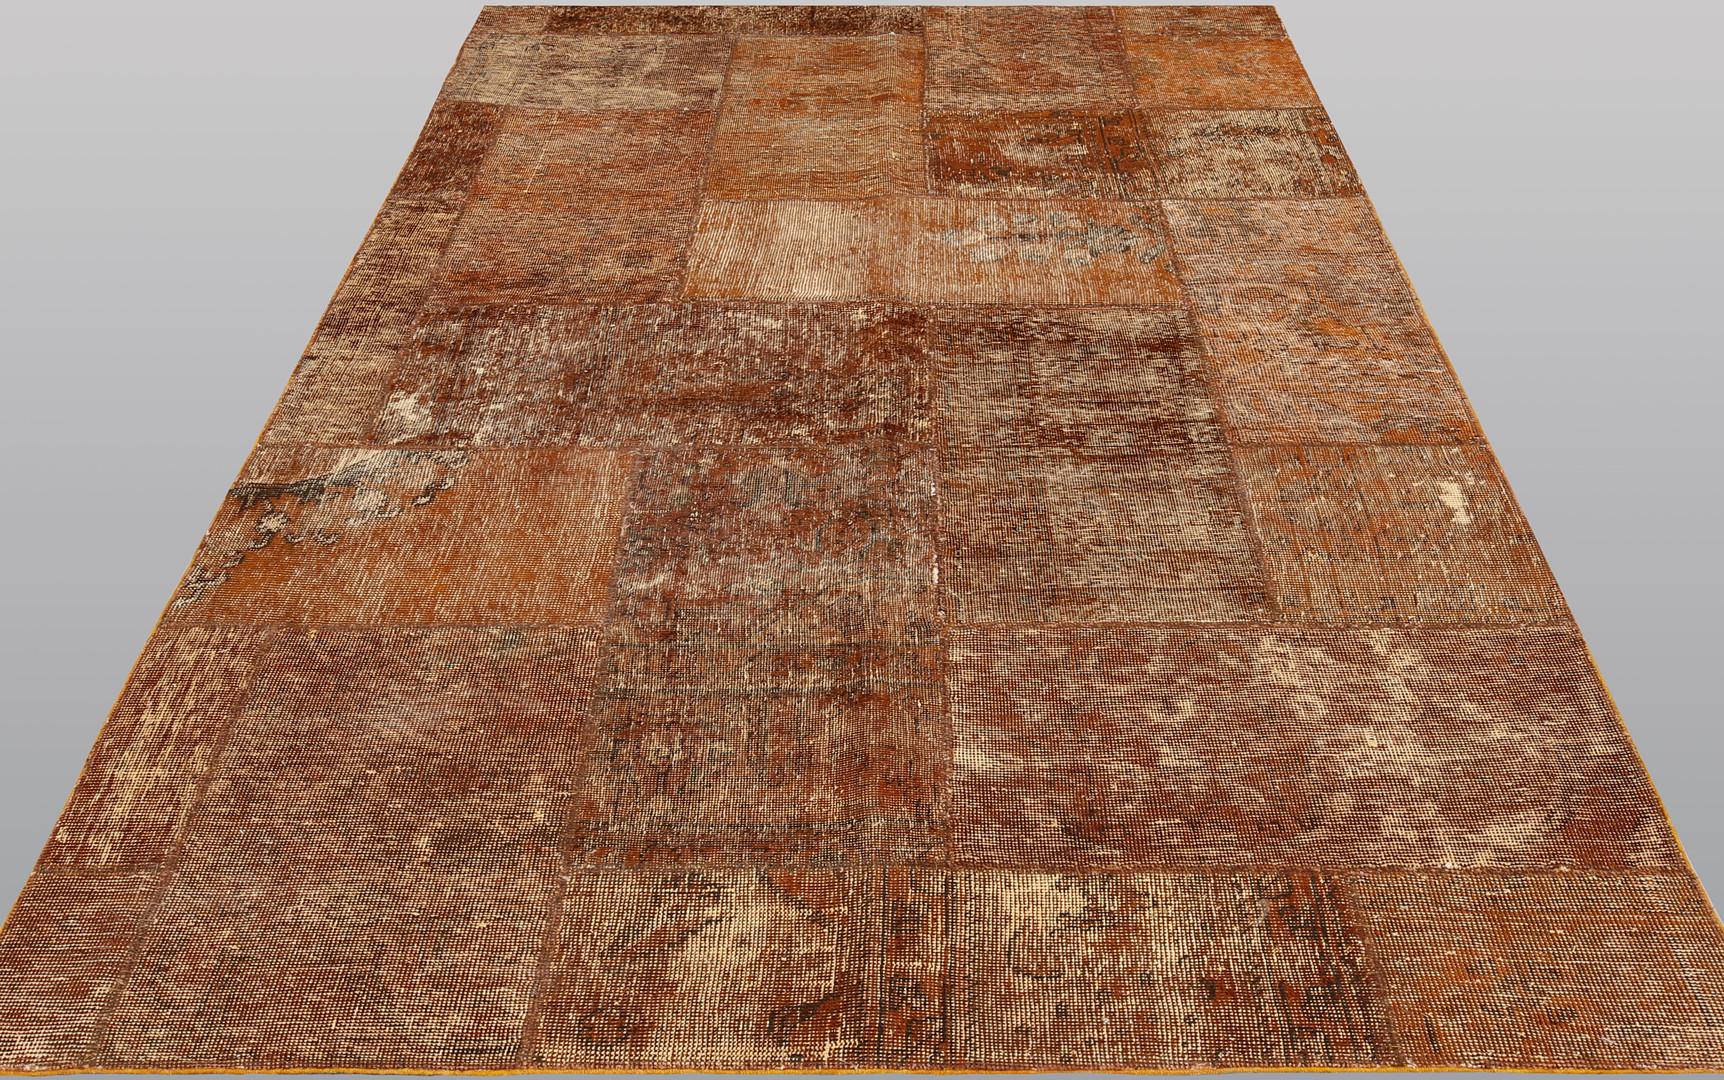 The generously sized oriental rug, measuring 250x150 centimeters, is a work of art that reflects the rich tradition and craftsmanship of oriental culture. Made from high-quality wool, this rug not only provides warmth and comfort, but also adds a